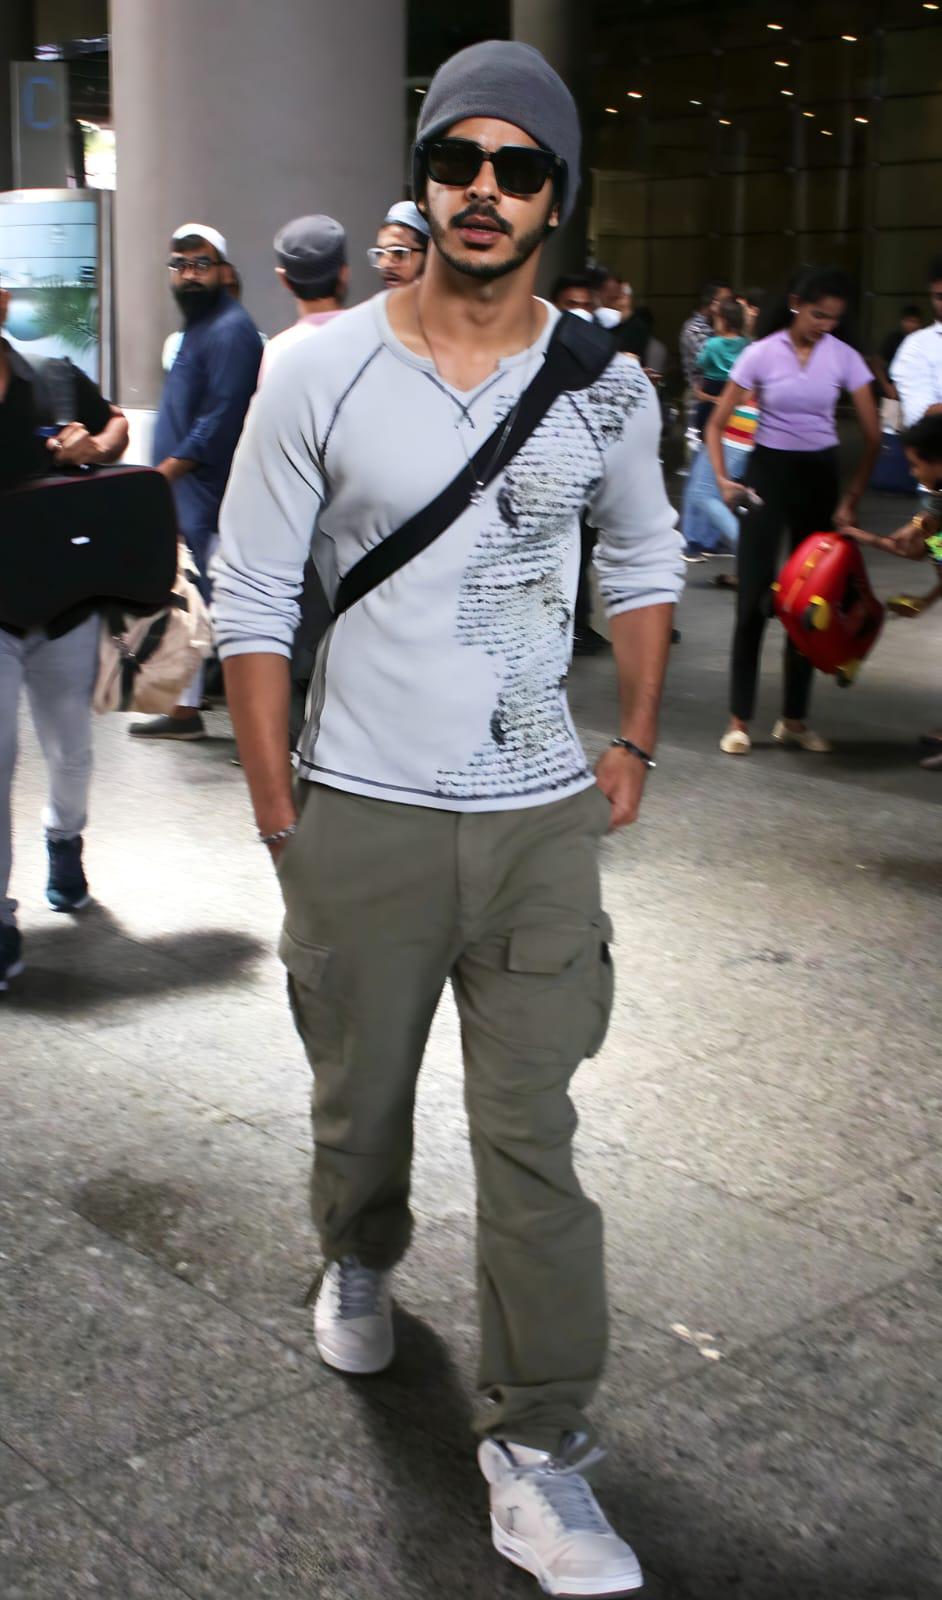 With an effortless blend of comfort and style, the young actor makes a statement with his trendy airport fashion.